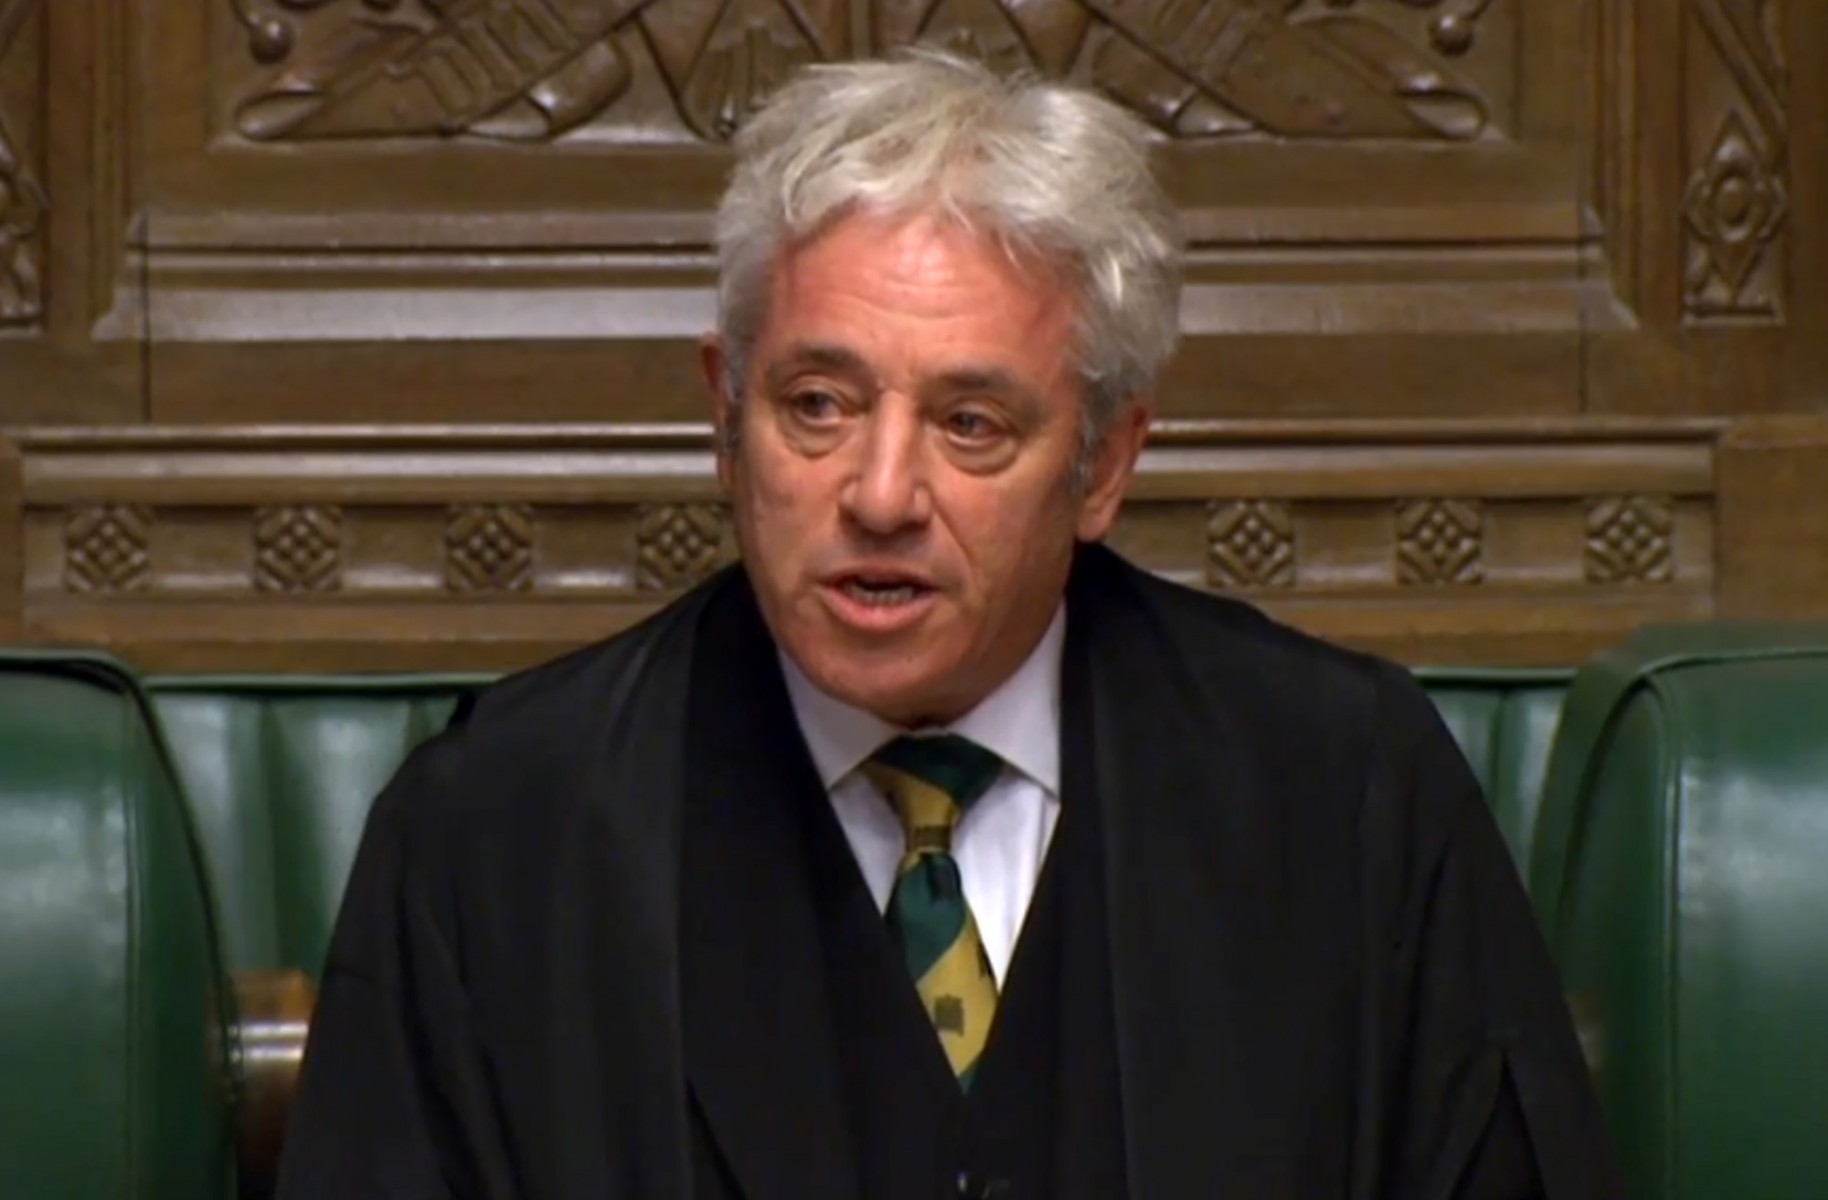 The dossier runs to 'dozens' of pages and catalogues five long years of alleged abuse by Mr Bercow